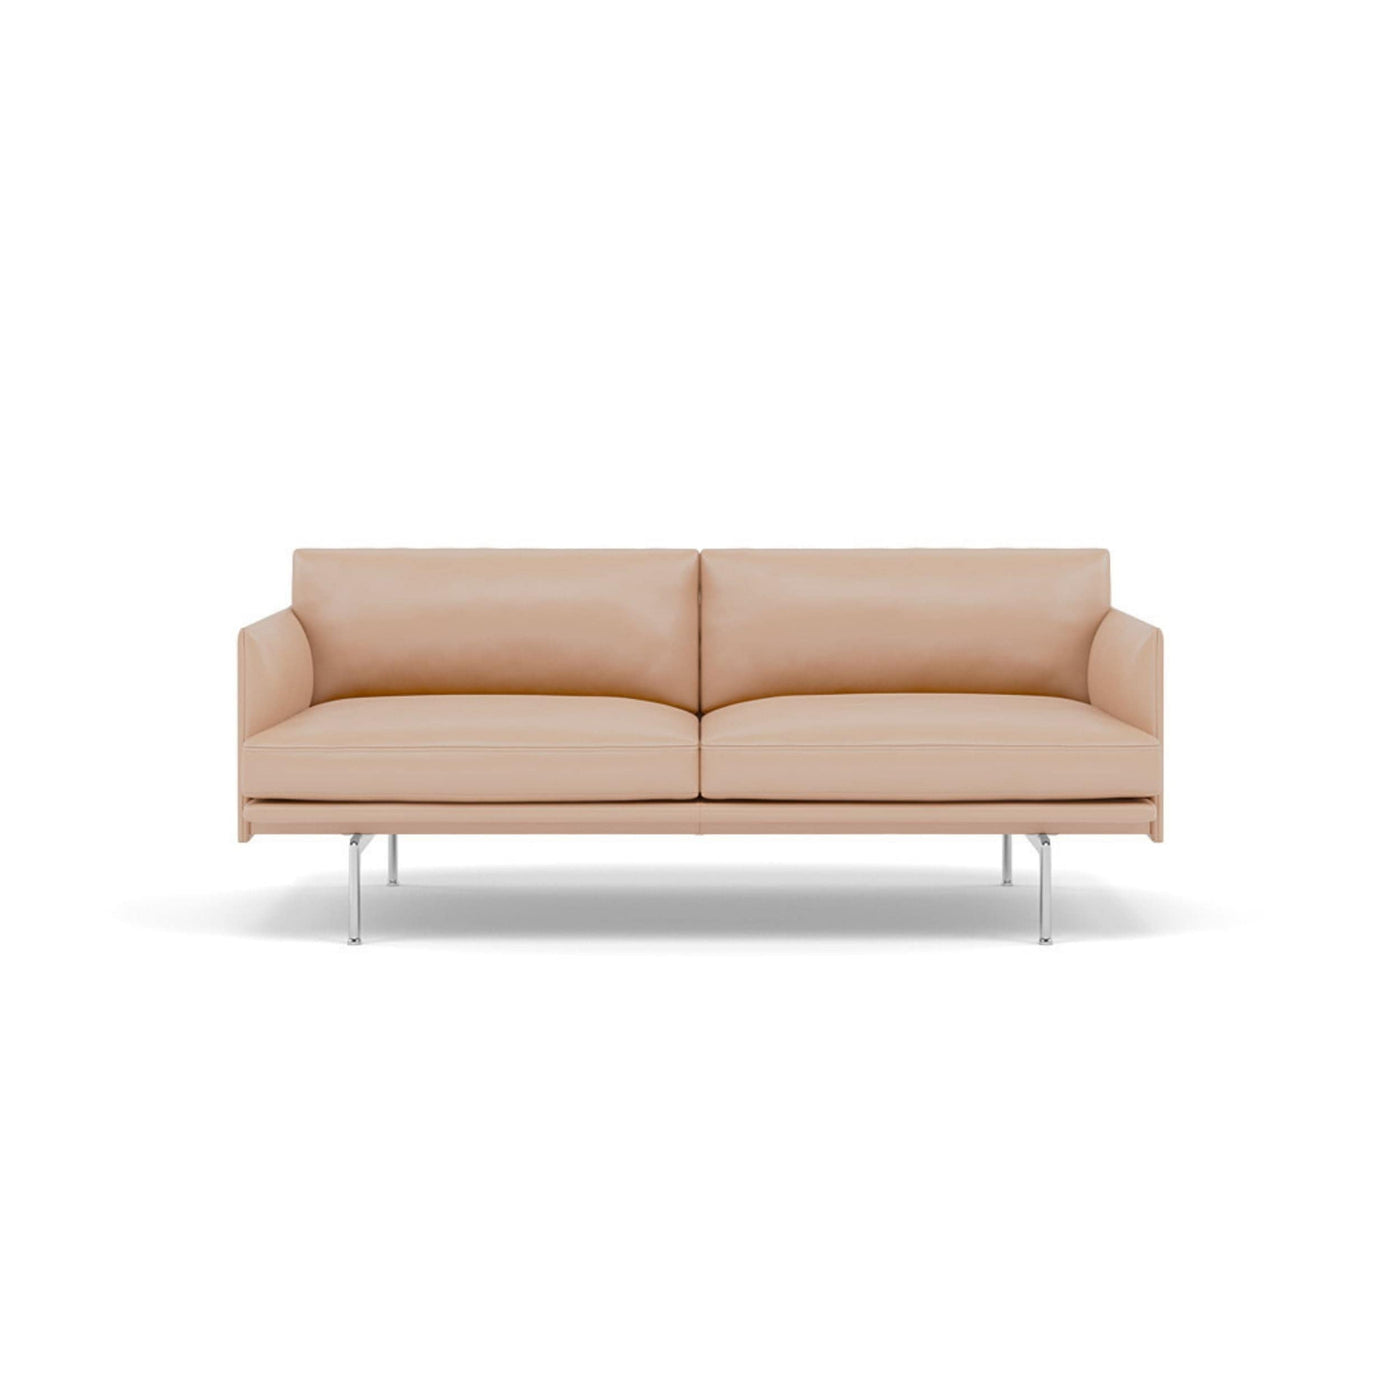 muuto outline 2 seater sofa in beige refine leather and polished aluminium legs. Made to order from someday designs. #colour_beige-refine-leather